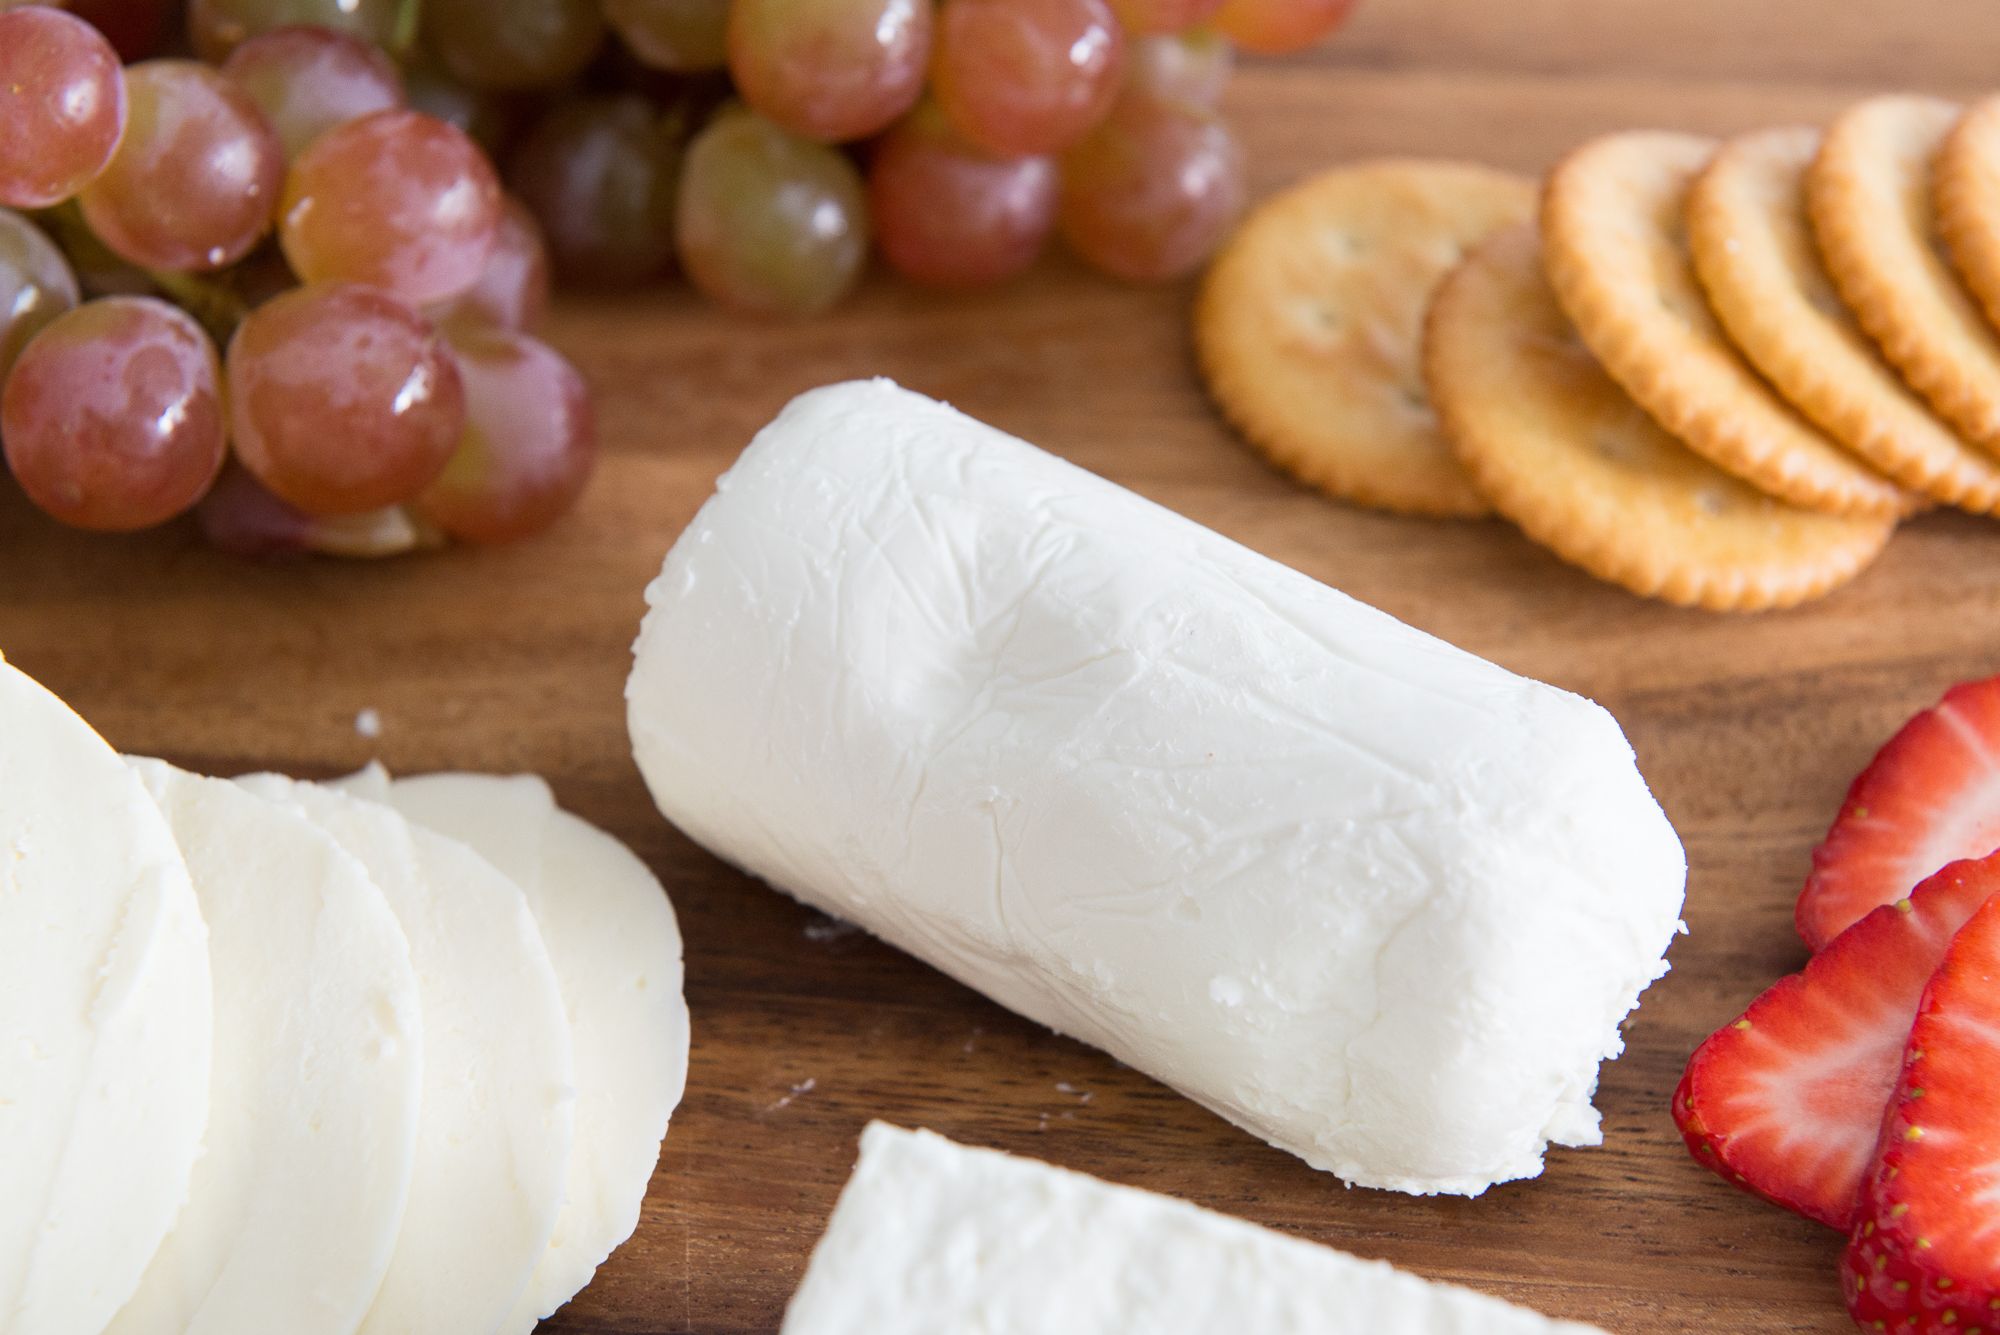 The complete guide to storing cheese